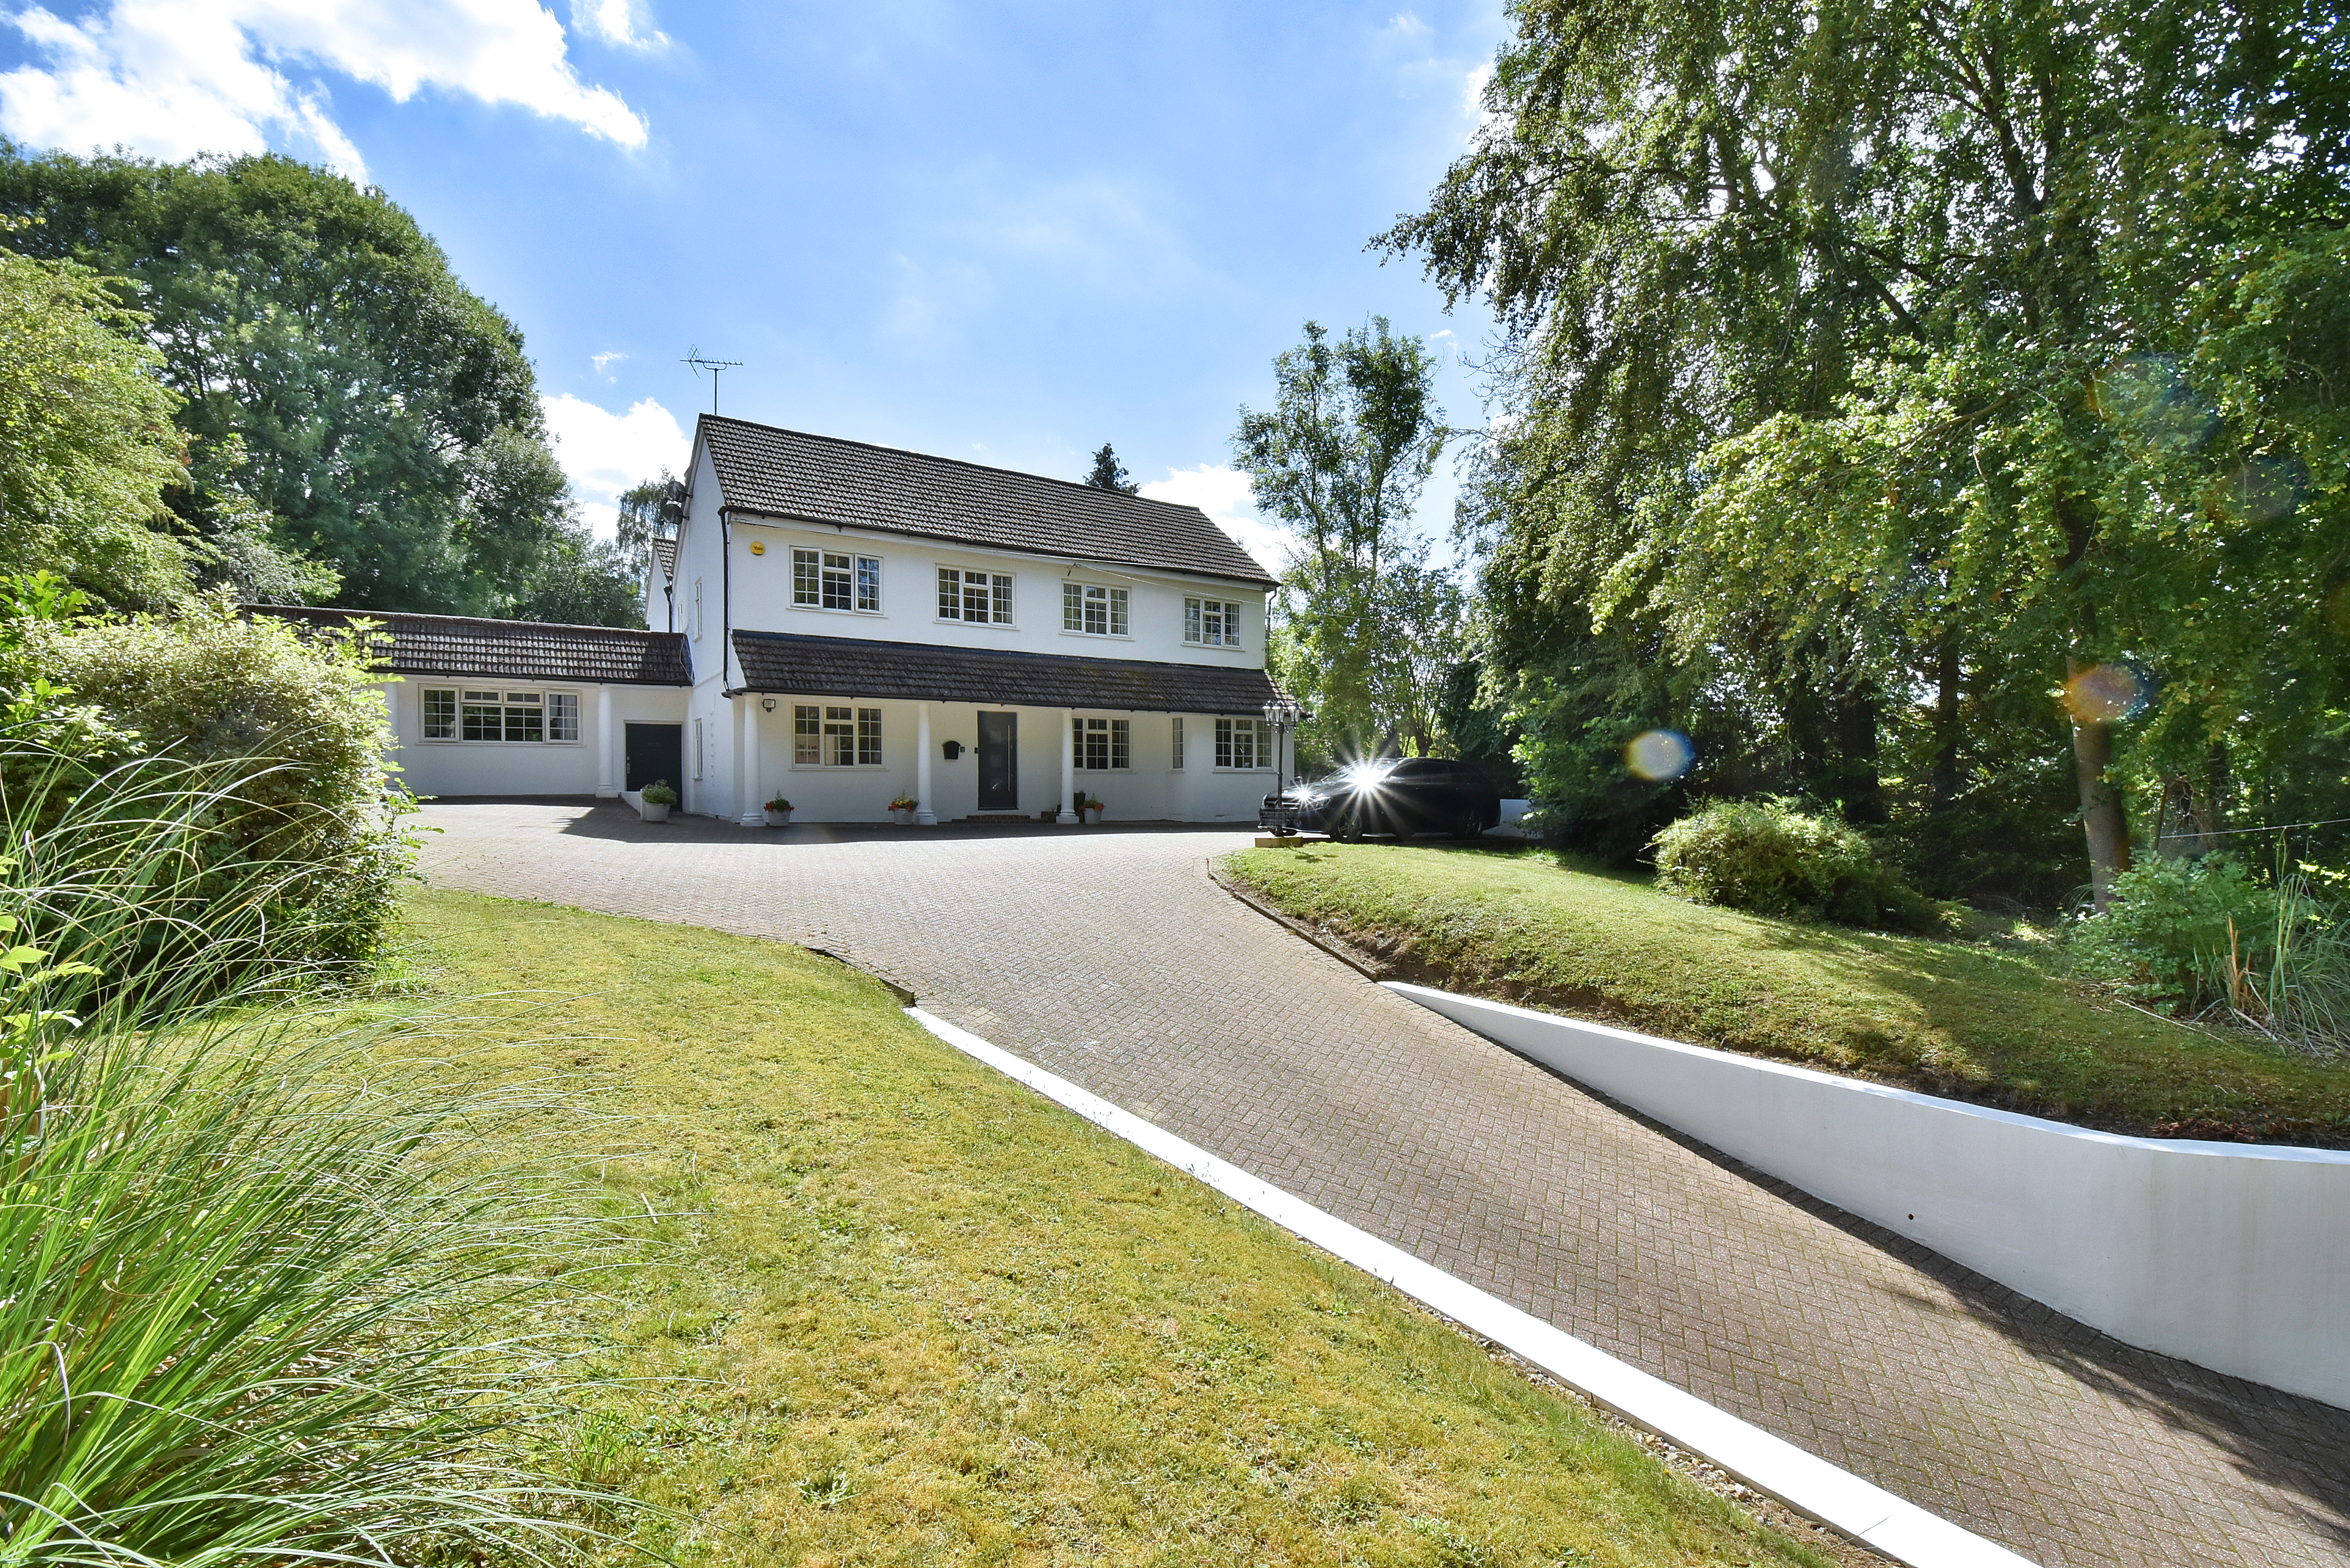 6 bed detached house for sale in Halstead, Sevenoaks  - Property Image 1